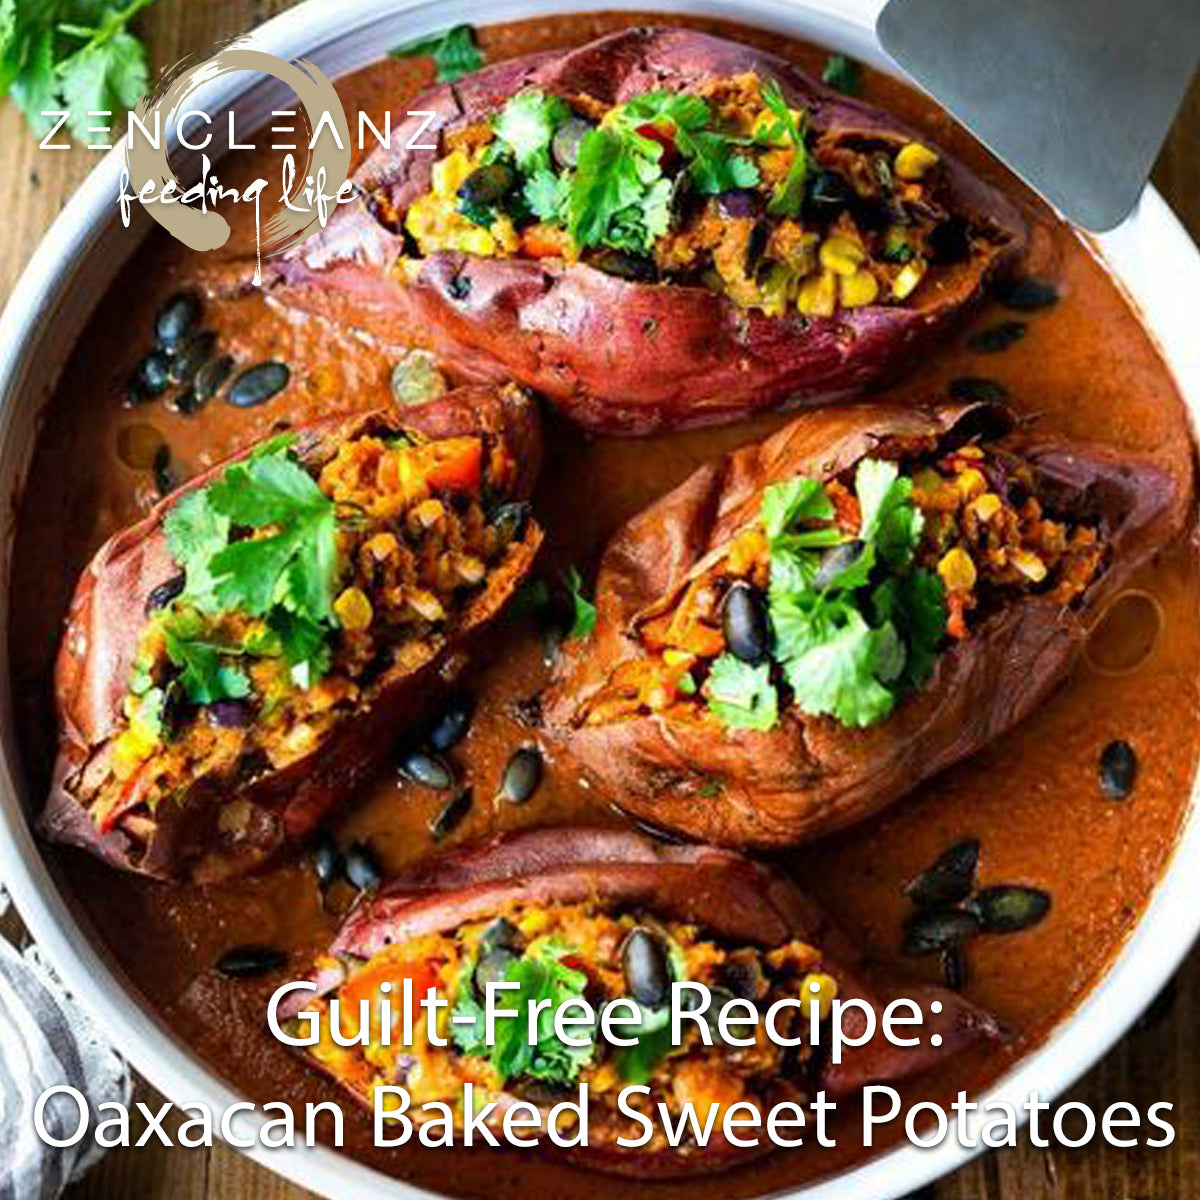 Oaxacan-Style, Baked Sweet Potatoes (From Sylvia Fontaine, Feasting at Home)